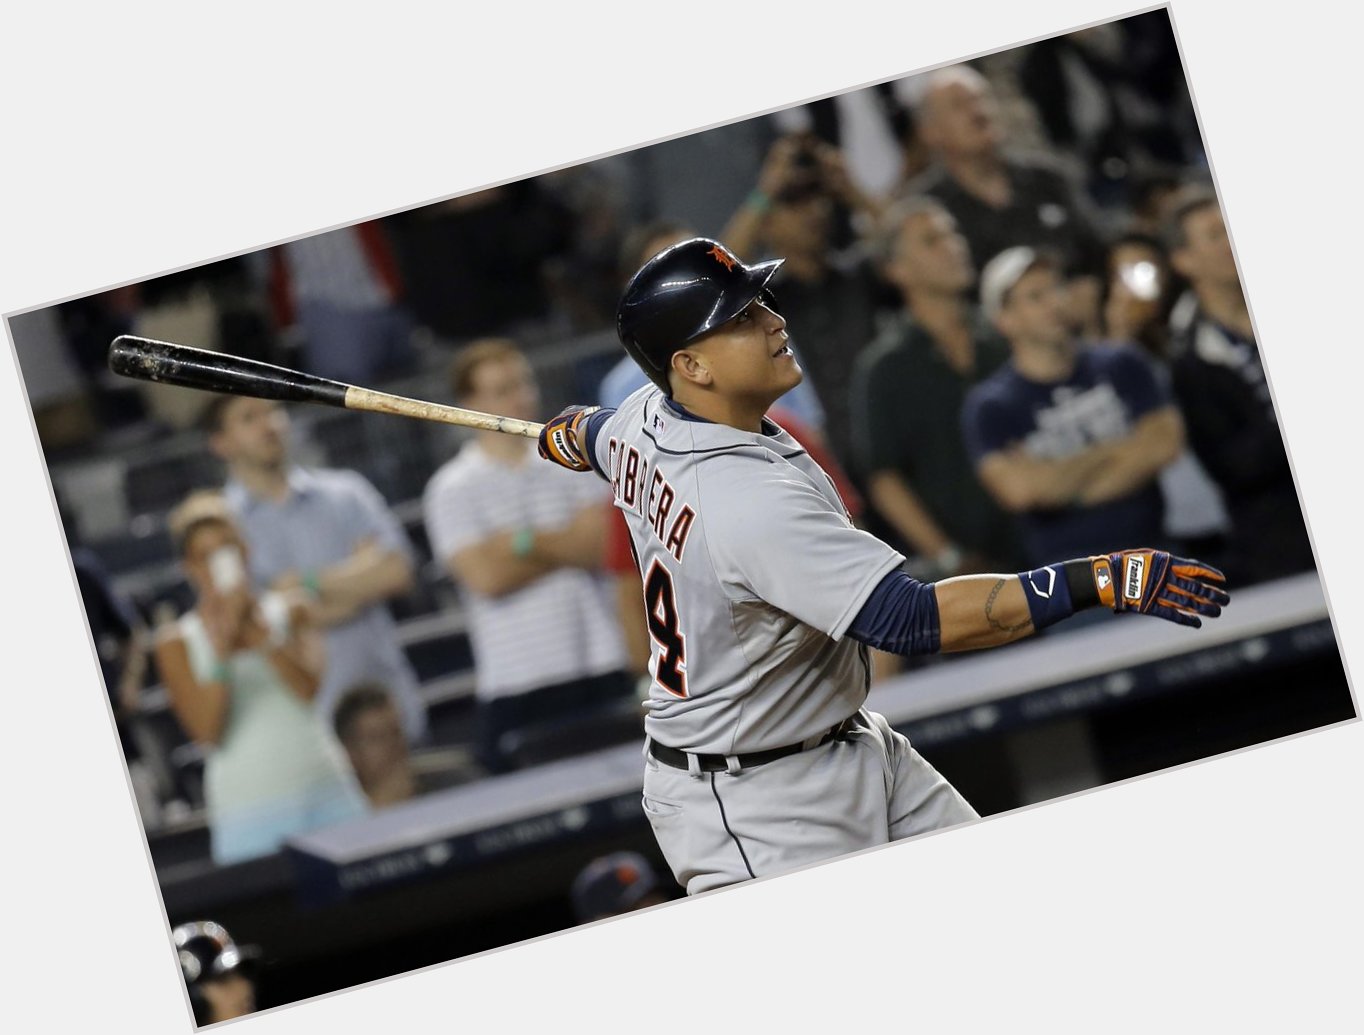 Happy Birthday to Miguel Cabrera, who turns 32 today! 